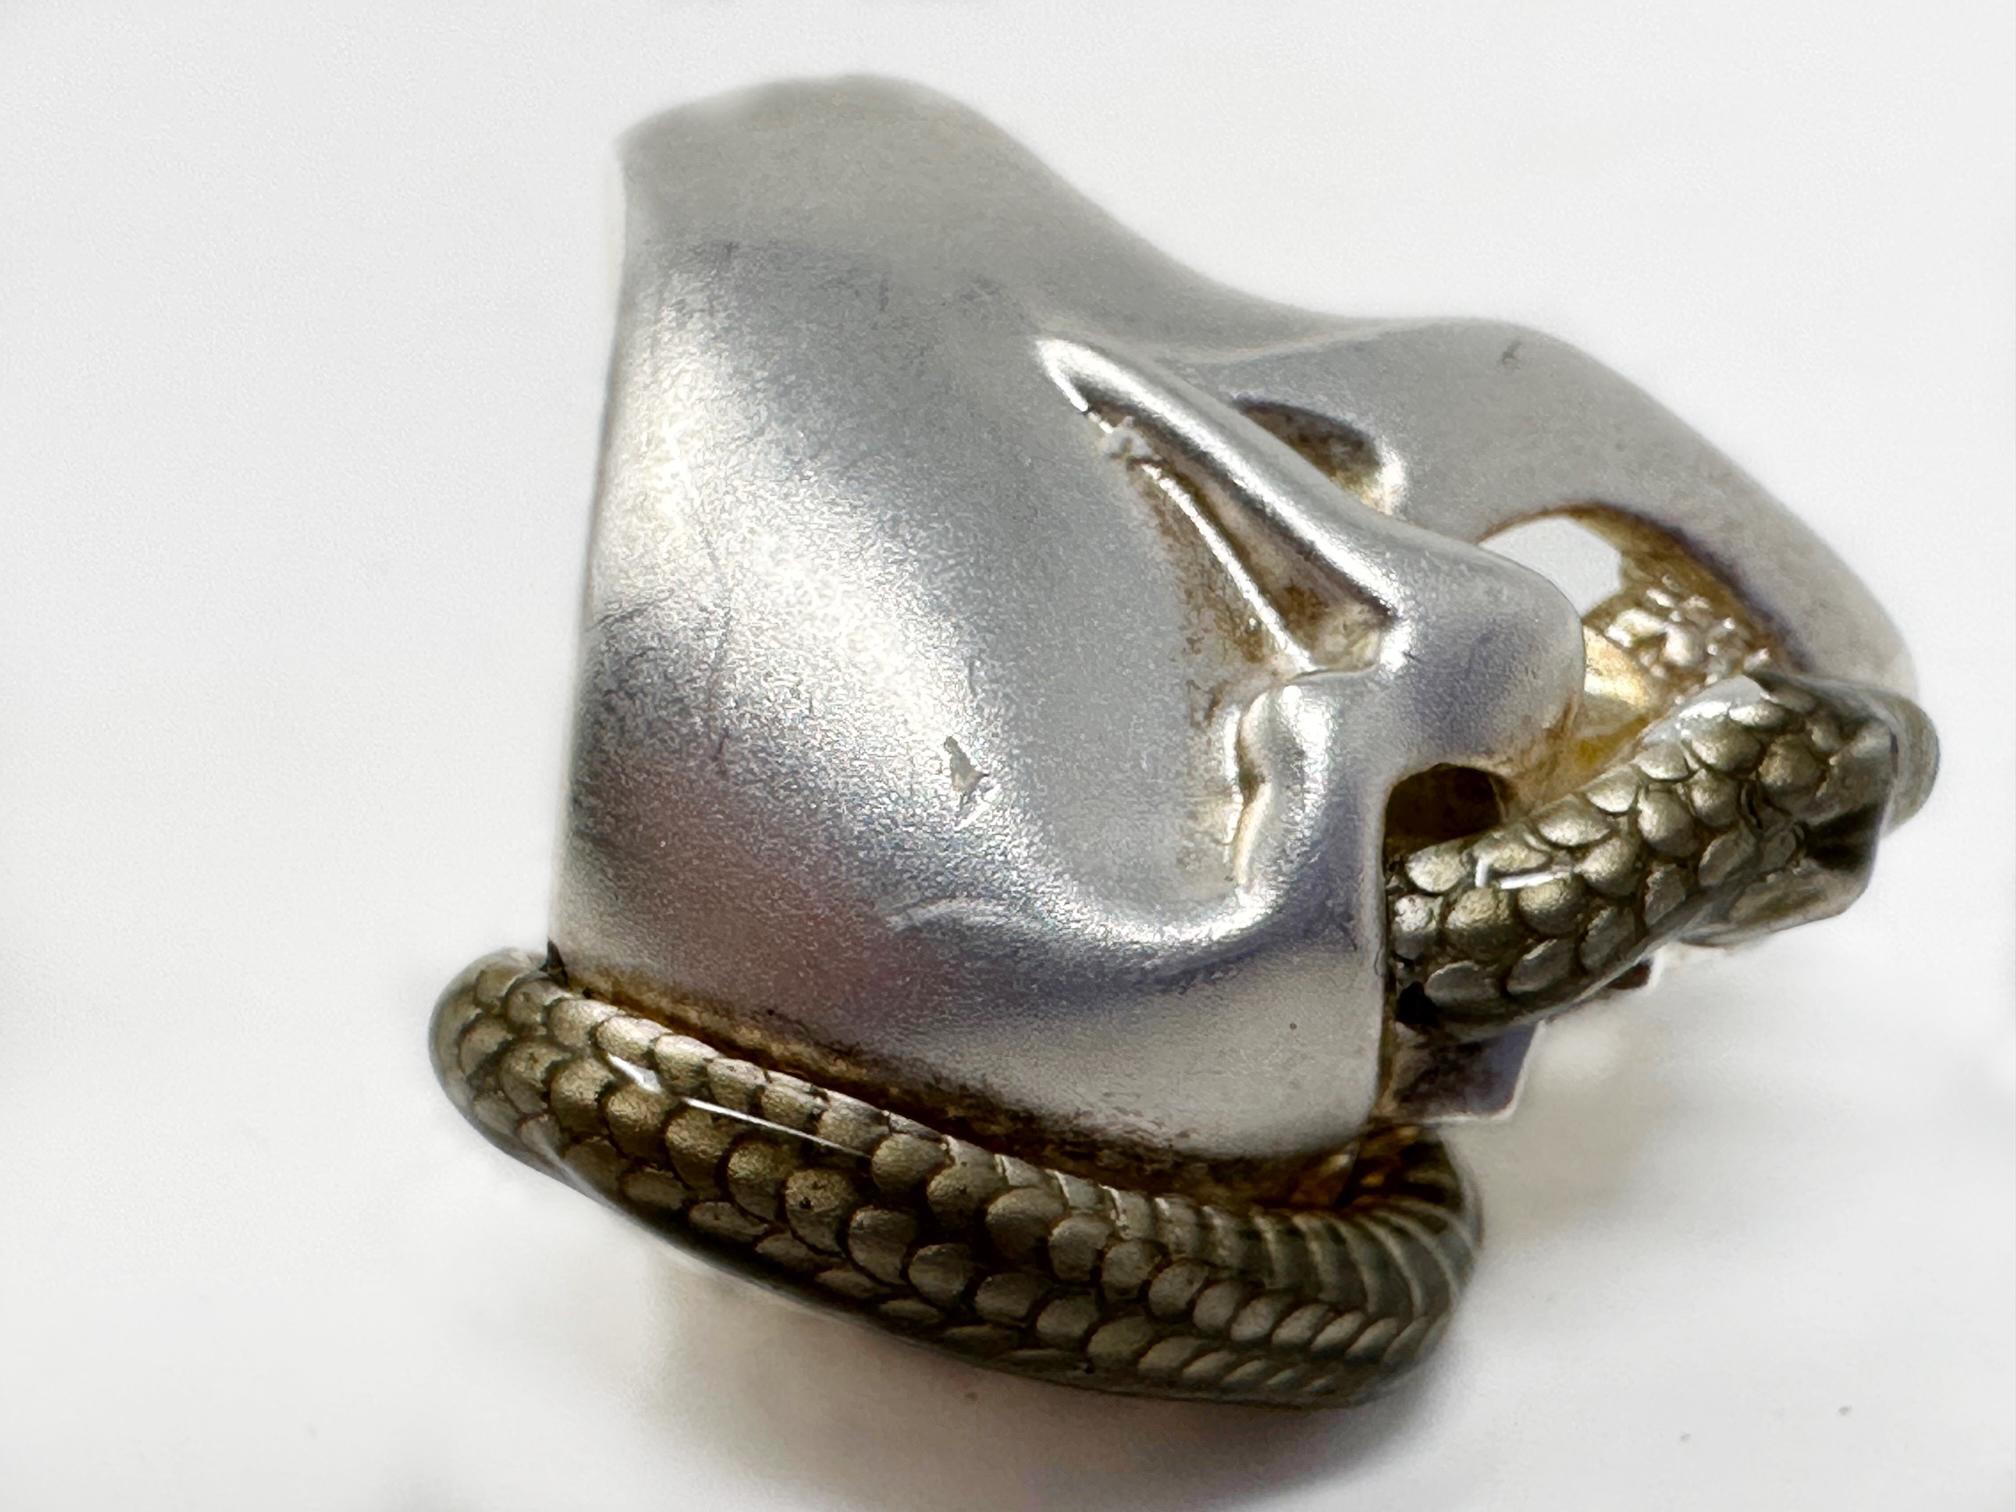 THEO FENNEL Solid Sterling Silver/Enamel Skull Ring In Good Condition For Sale In Newport Coast, CA